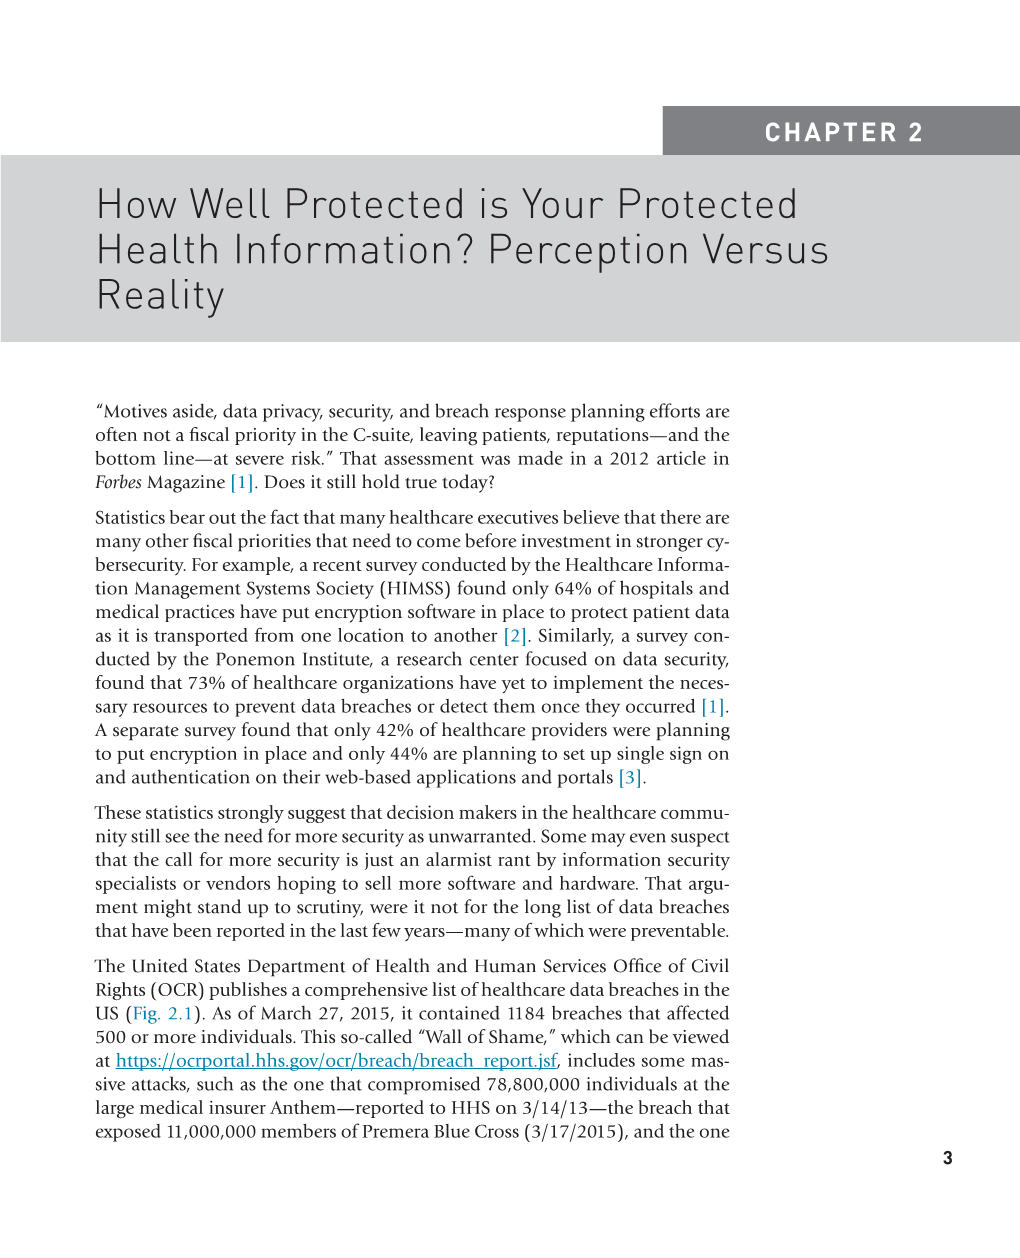 CHAPTER 2 How Well Protected Is Your Protected Health Information? Perception Versus Reality